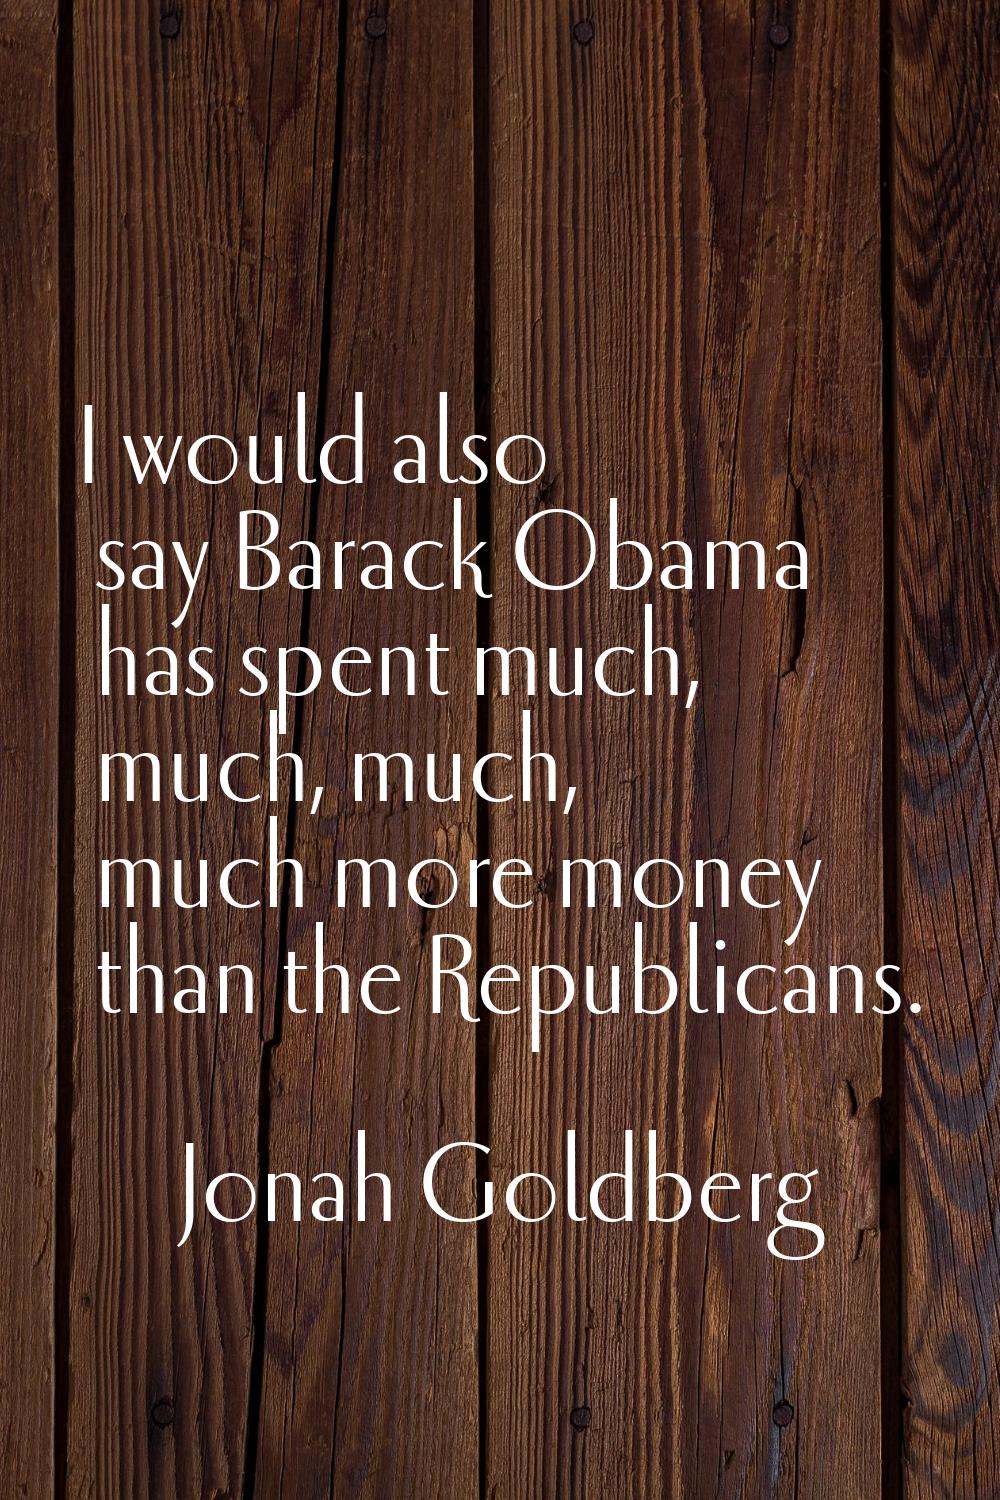 I would also say Barack Obama has spent much, much, much, much more money than the Republicans.